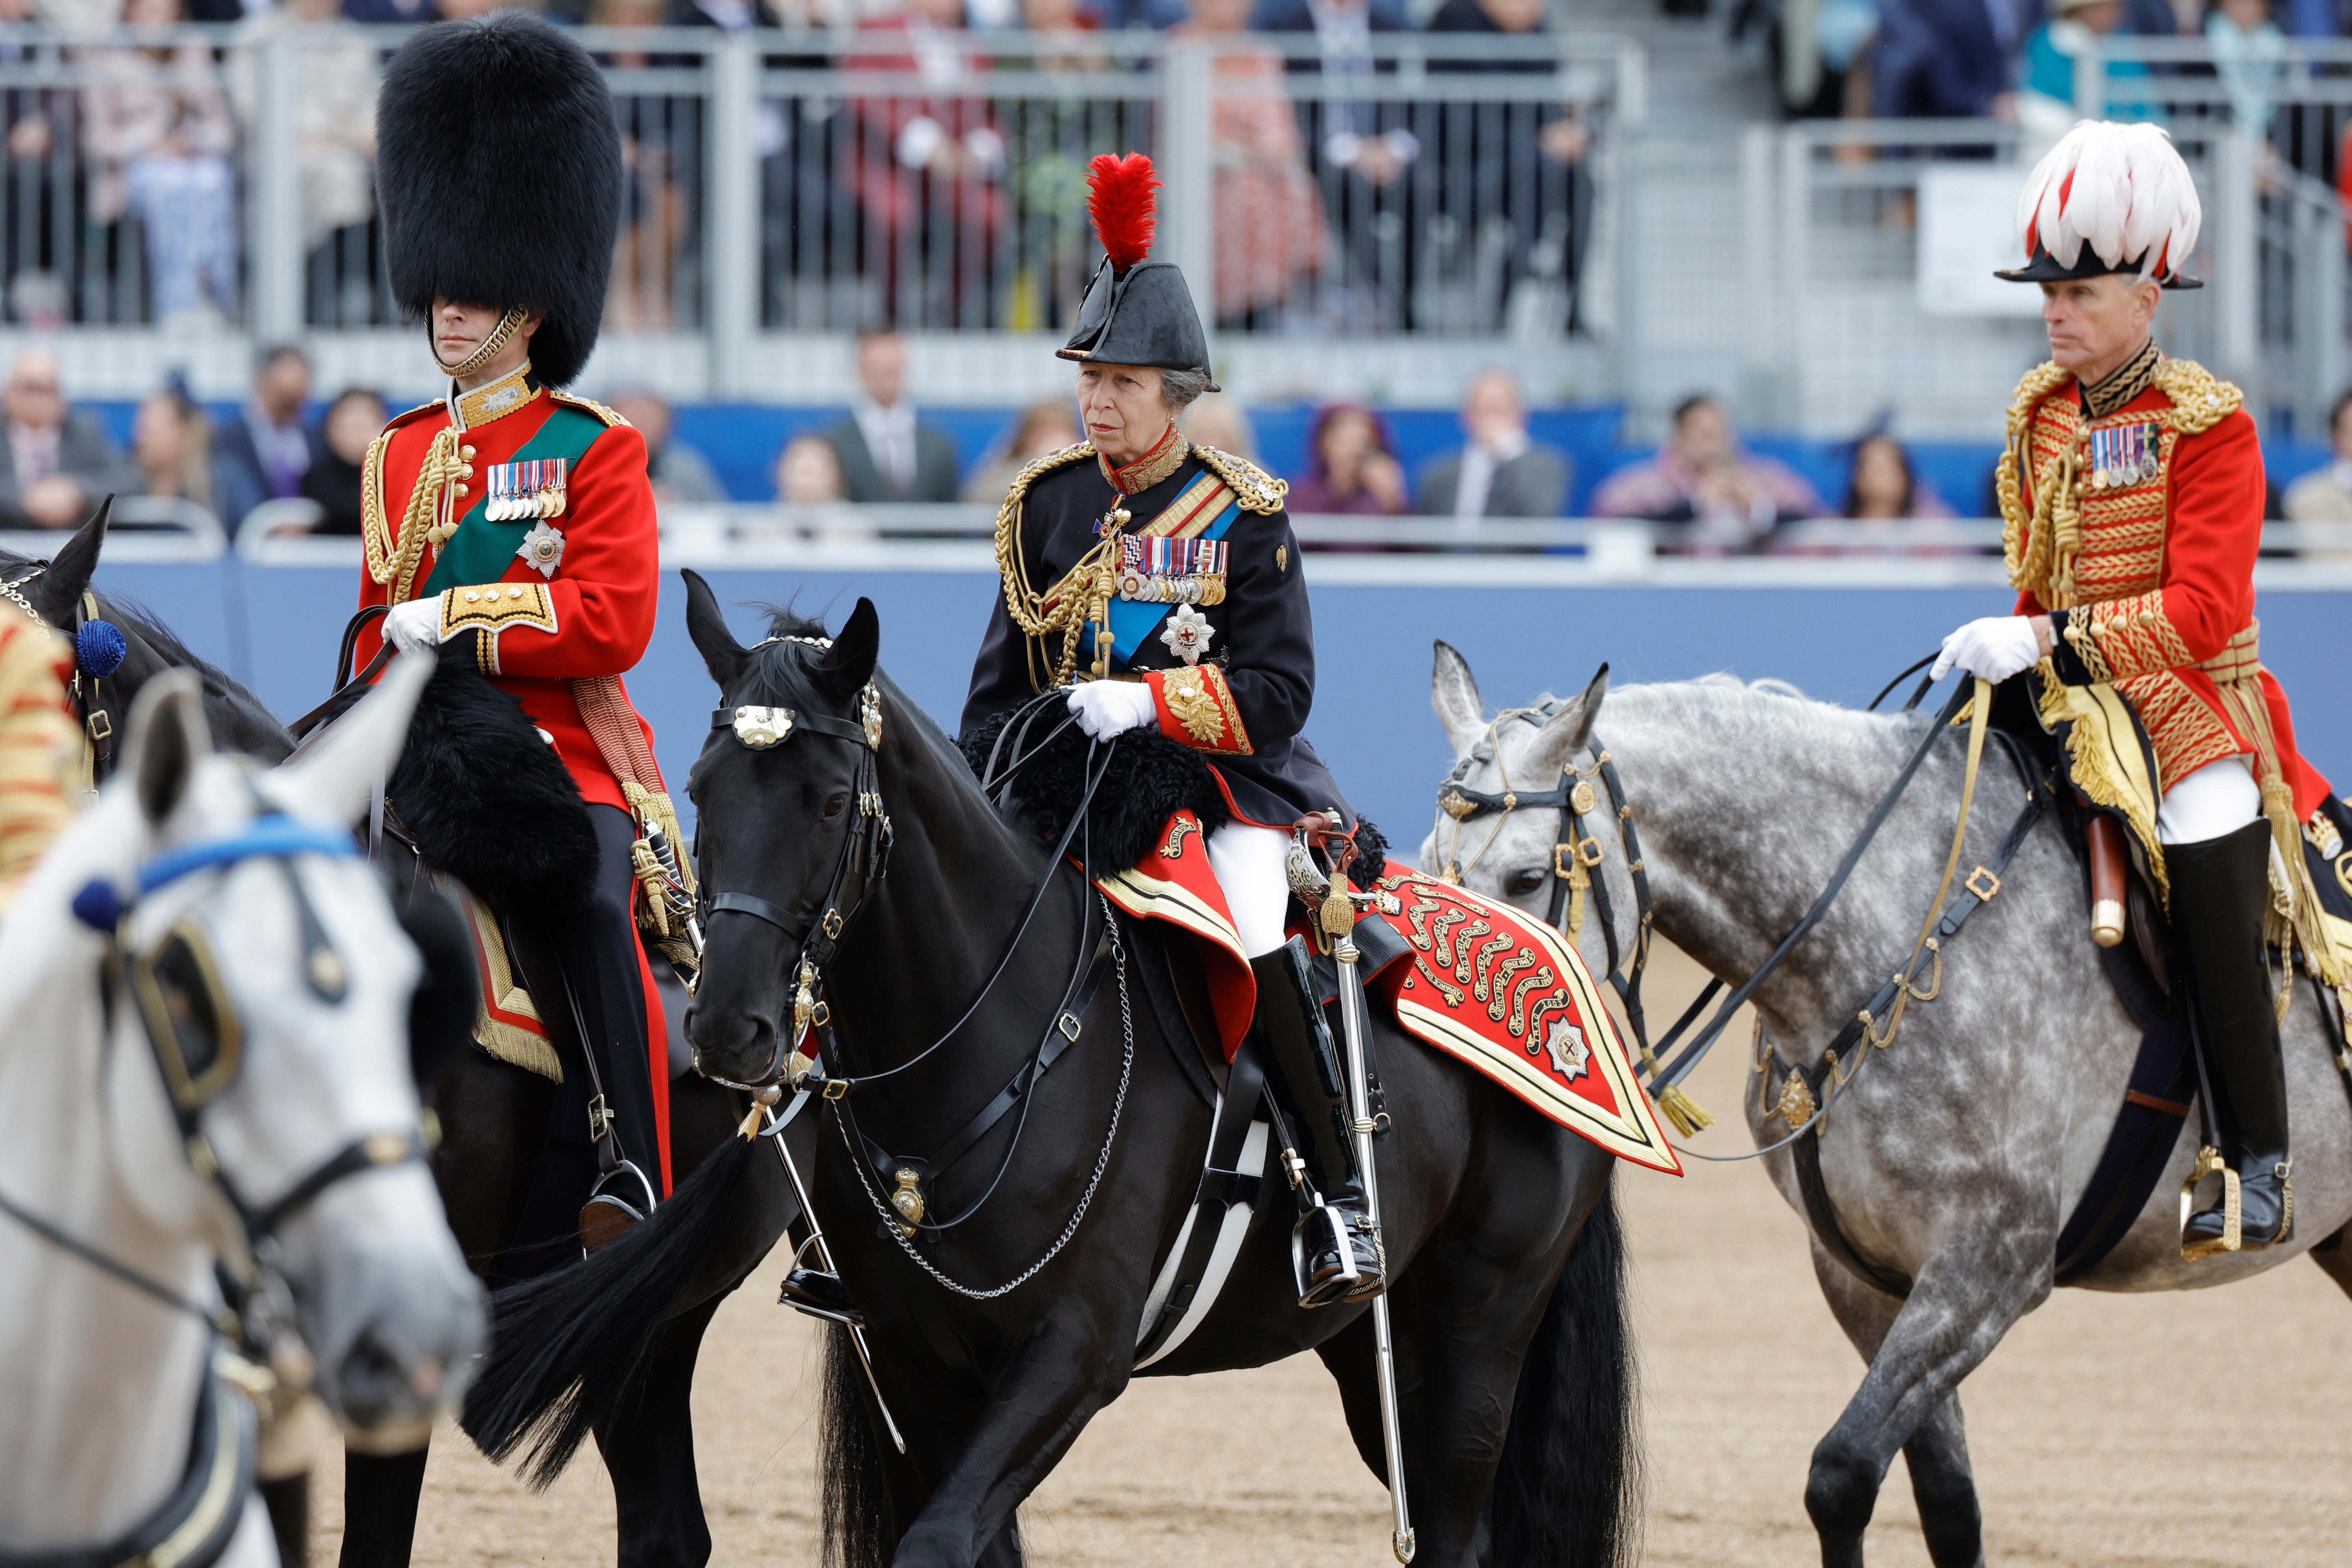 The Princess Royal is an experienced rider and participated in the Trooping the Colour this month.